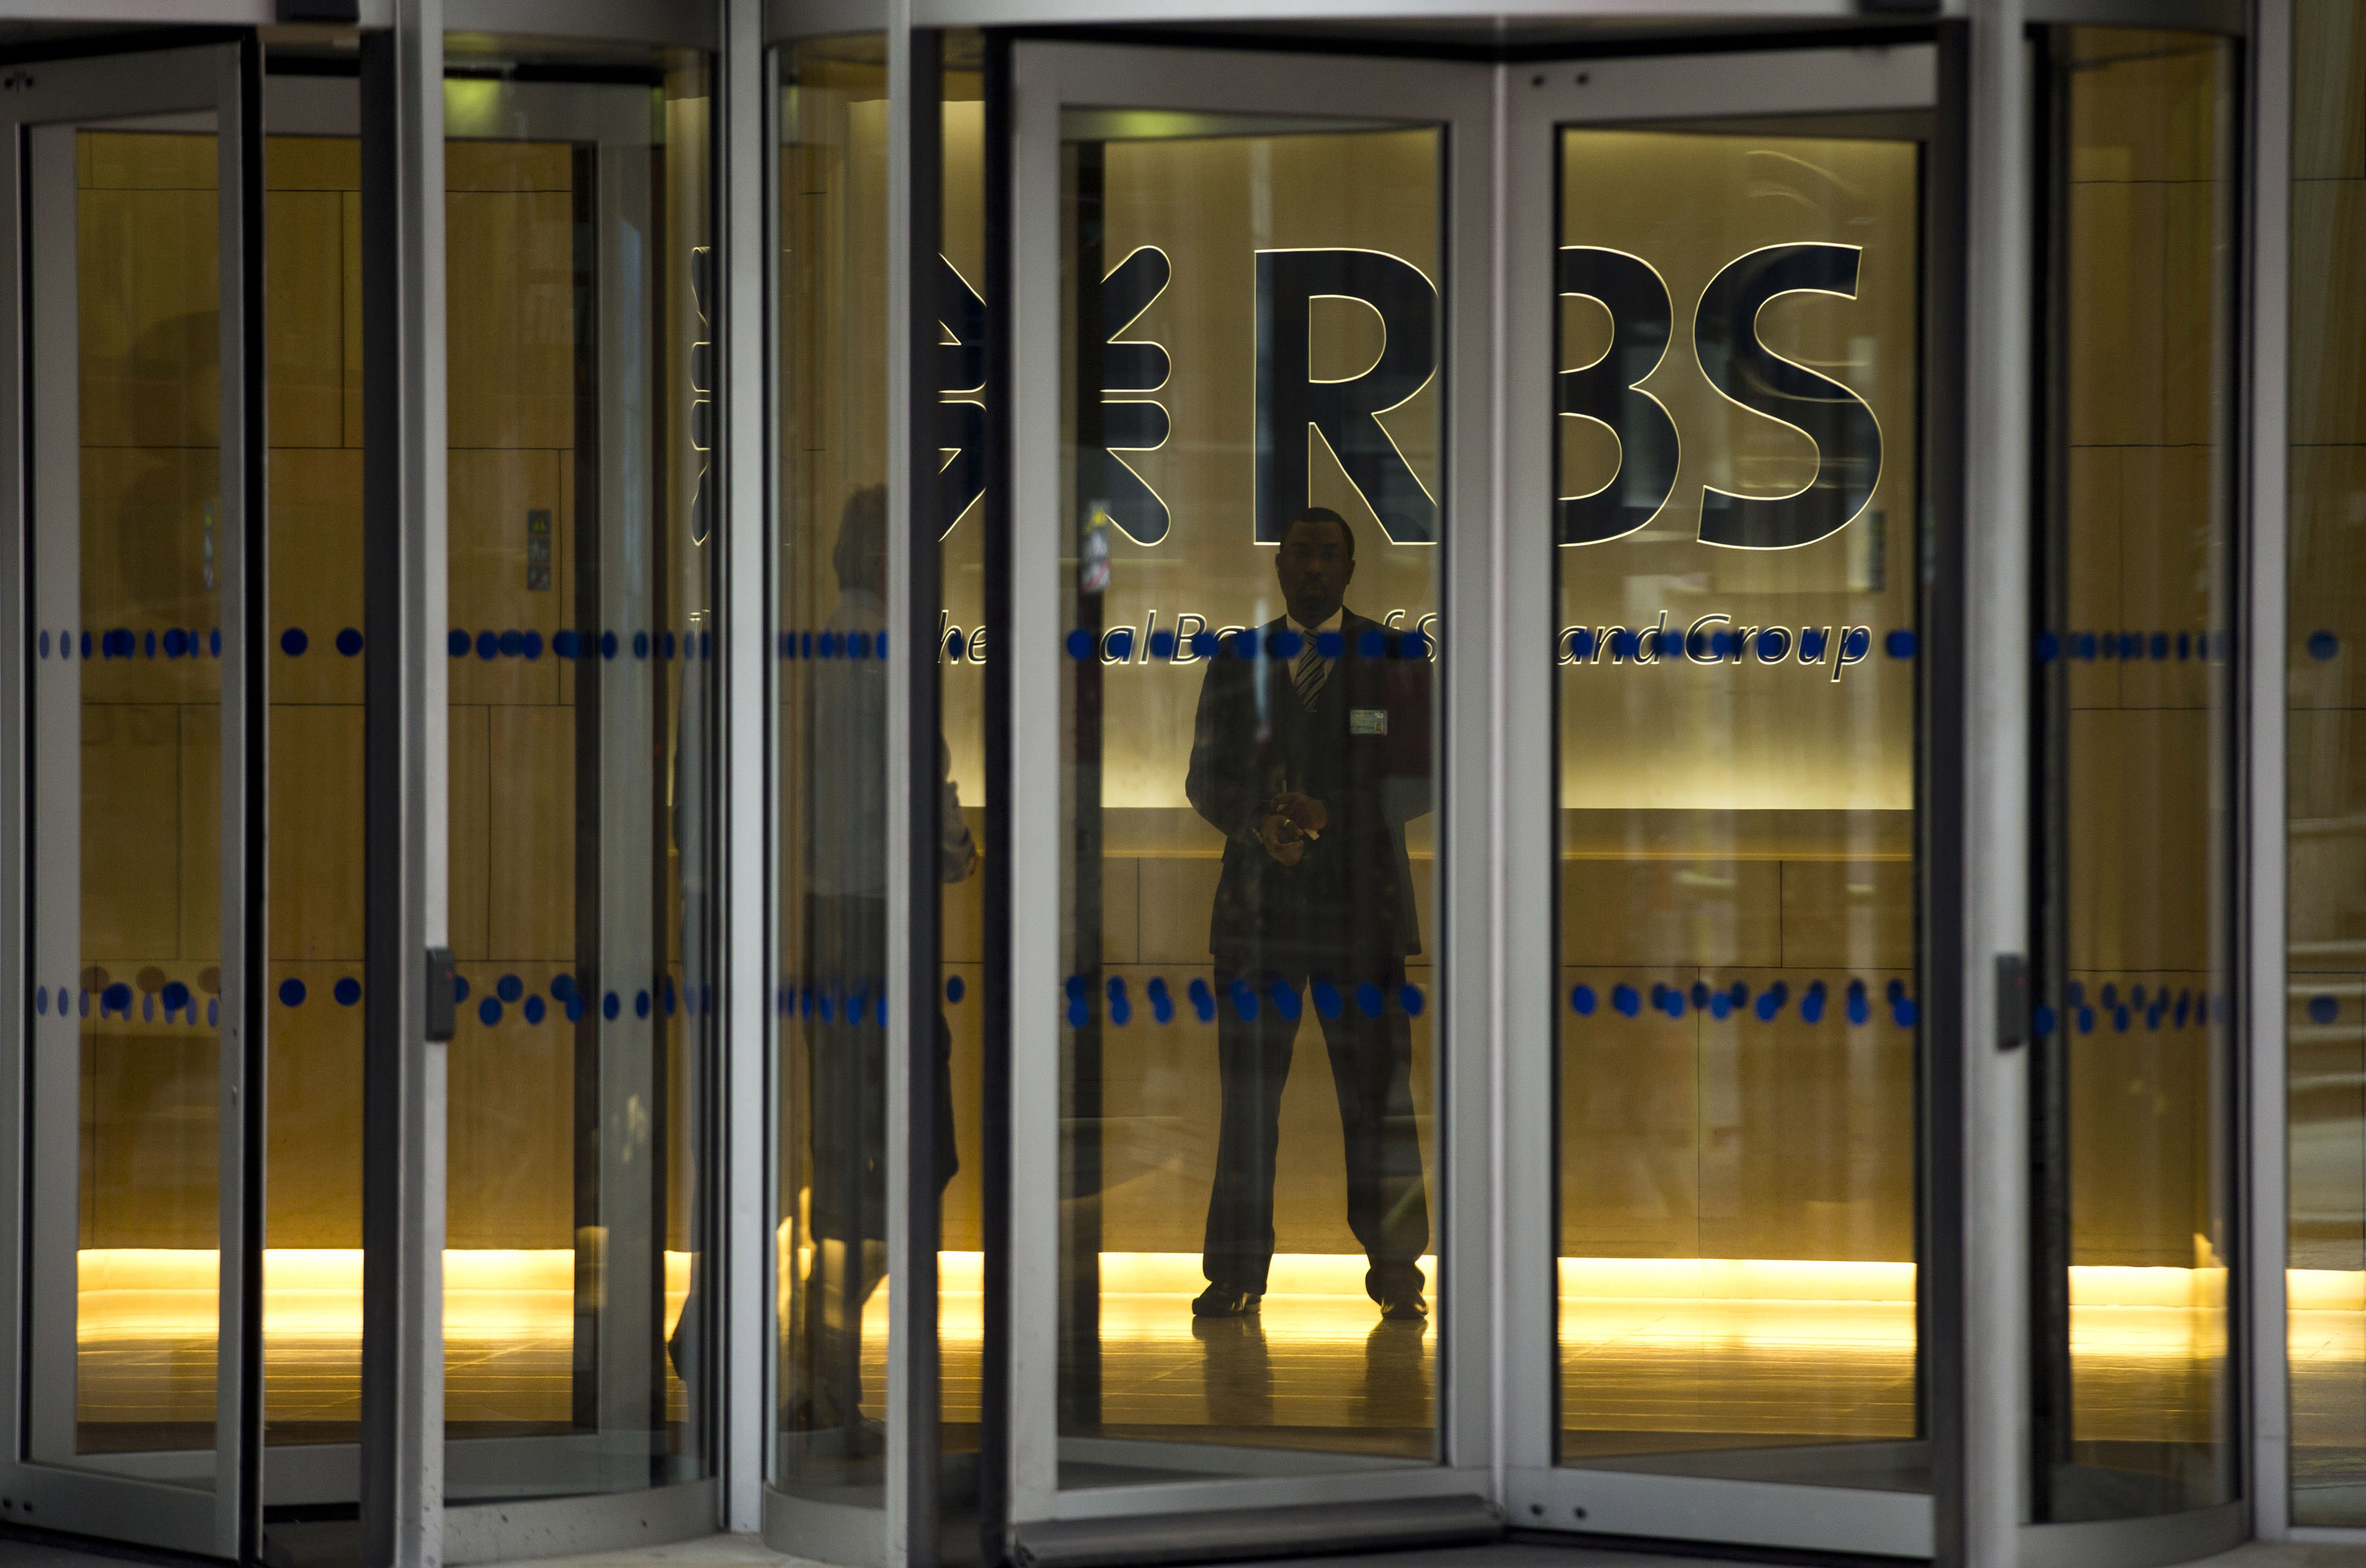 RBS has been accused in a report by a government adviser of pushing struggling small firms into its 'turnaround' unit, so it could charge higher fees and interest and take control of their assets. Photo: AP